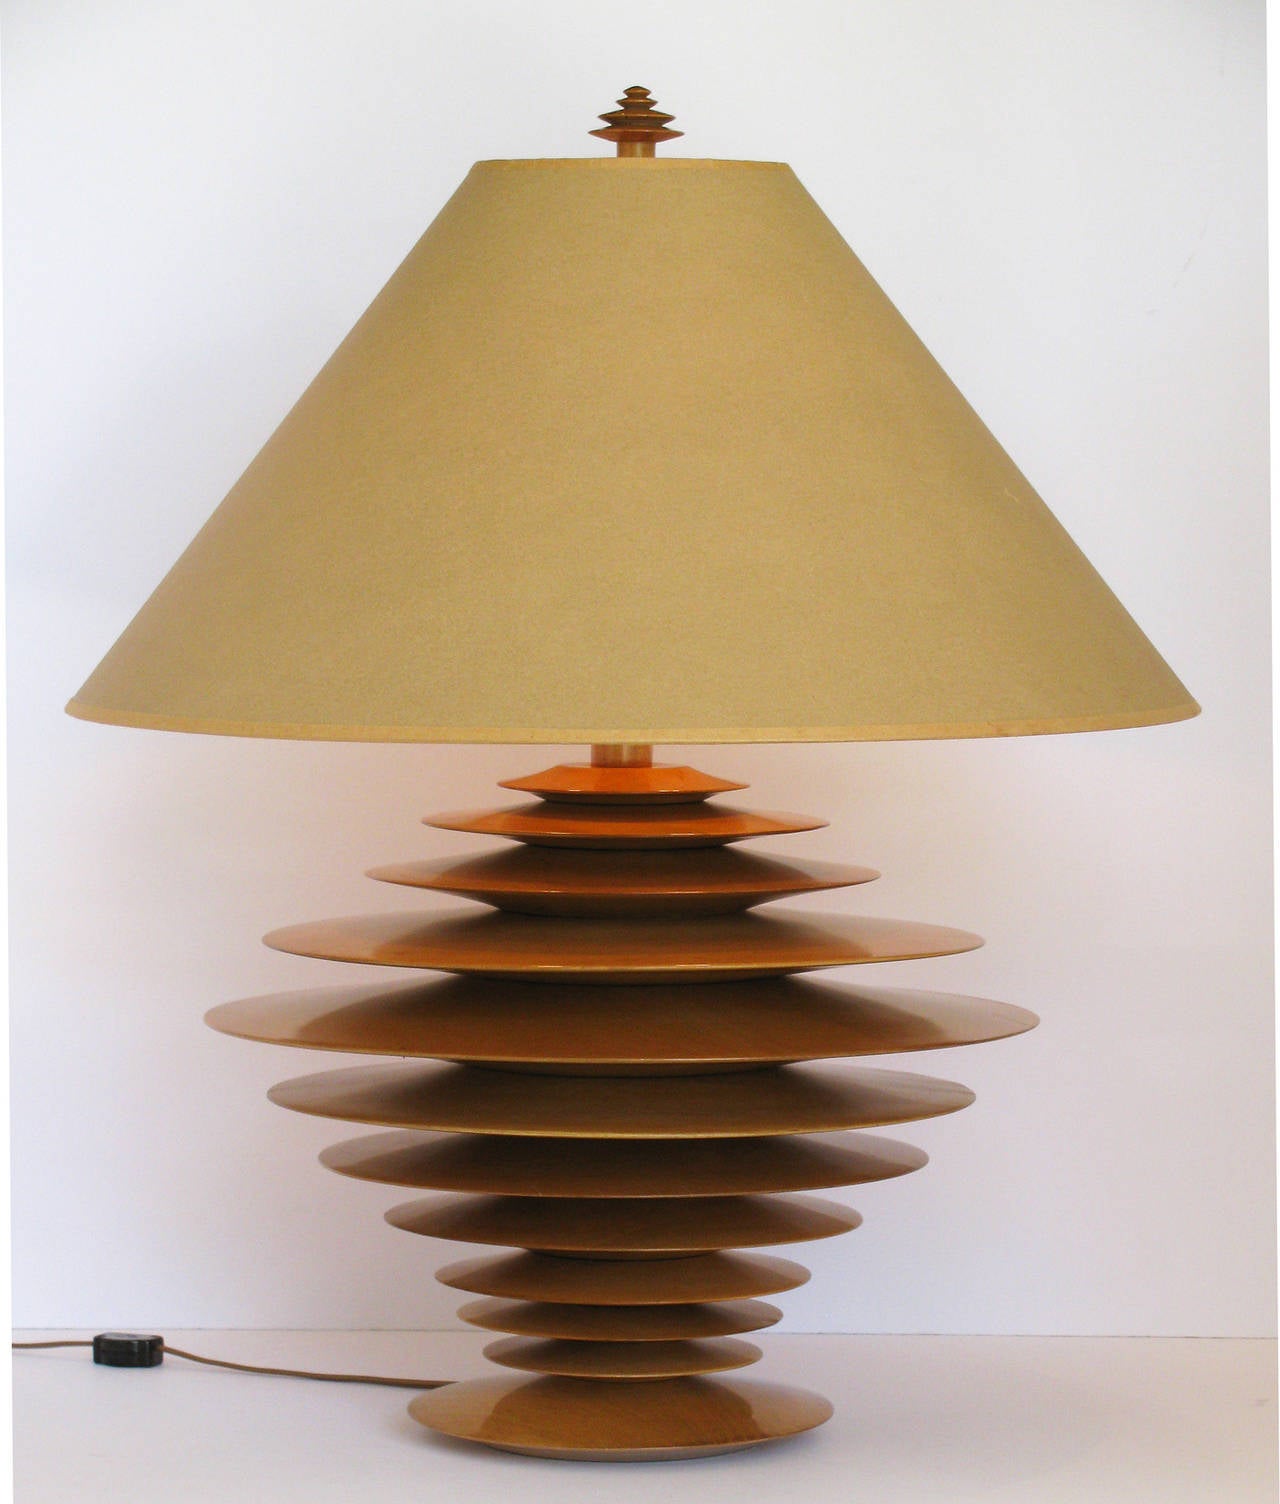 A stunning table lamp by designer Shepard Vineburg, Los Angeles, California. 